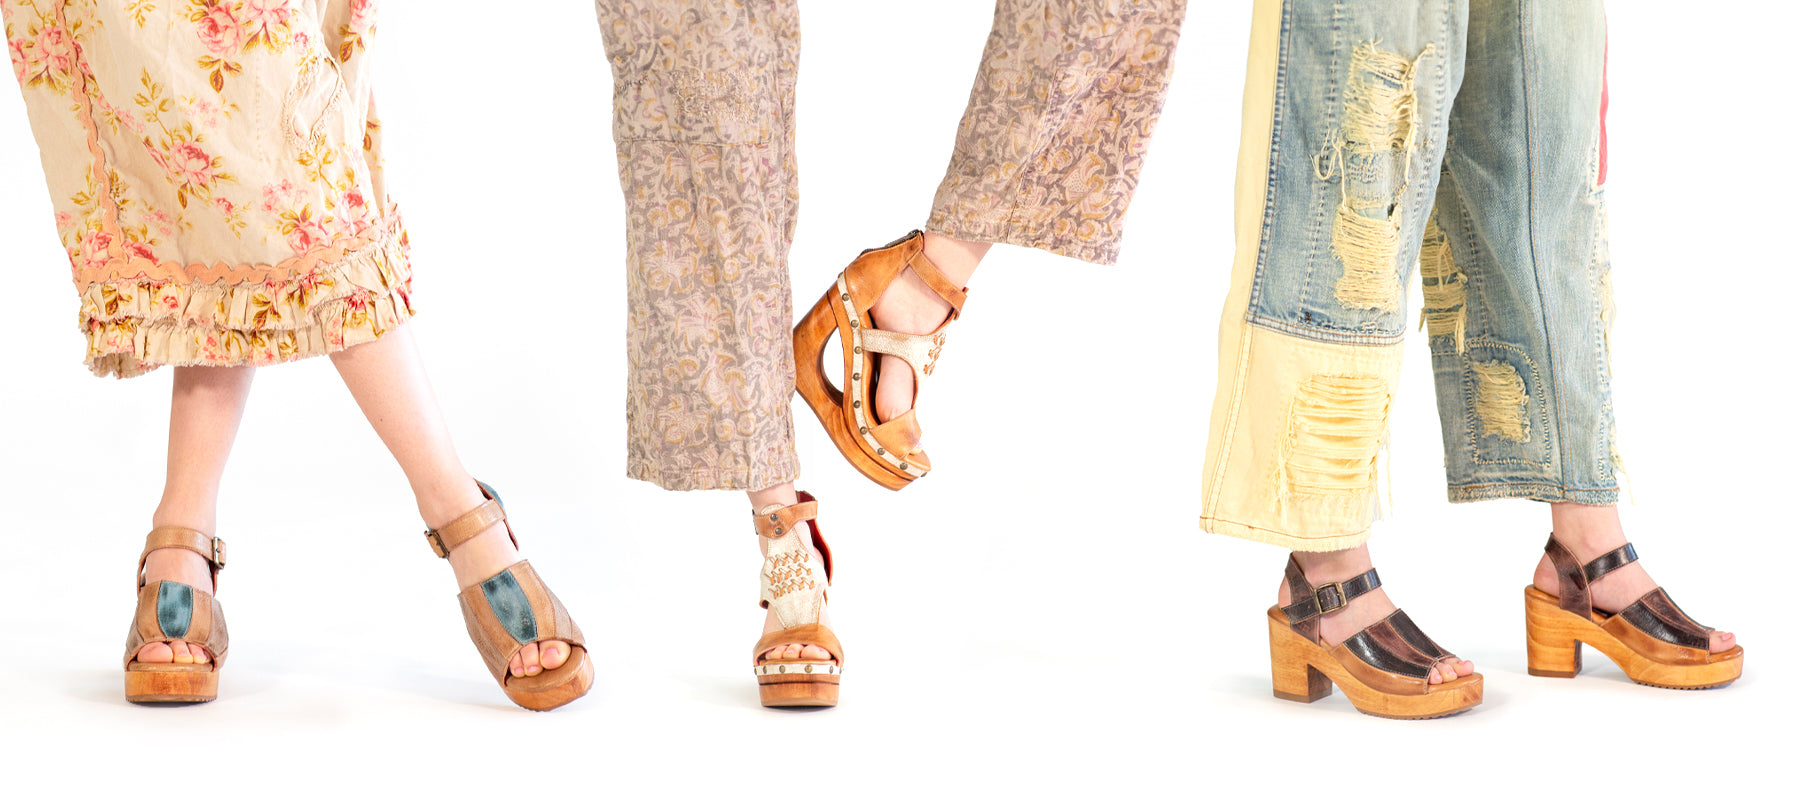 Three pairs of legs wearing different styles of high-heeled sandals and patchwork jeans.